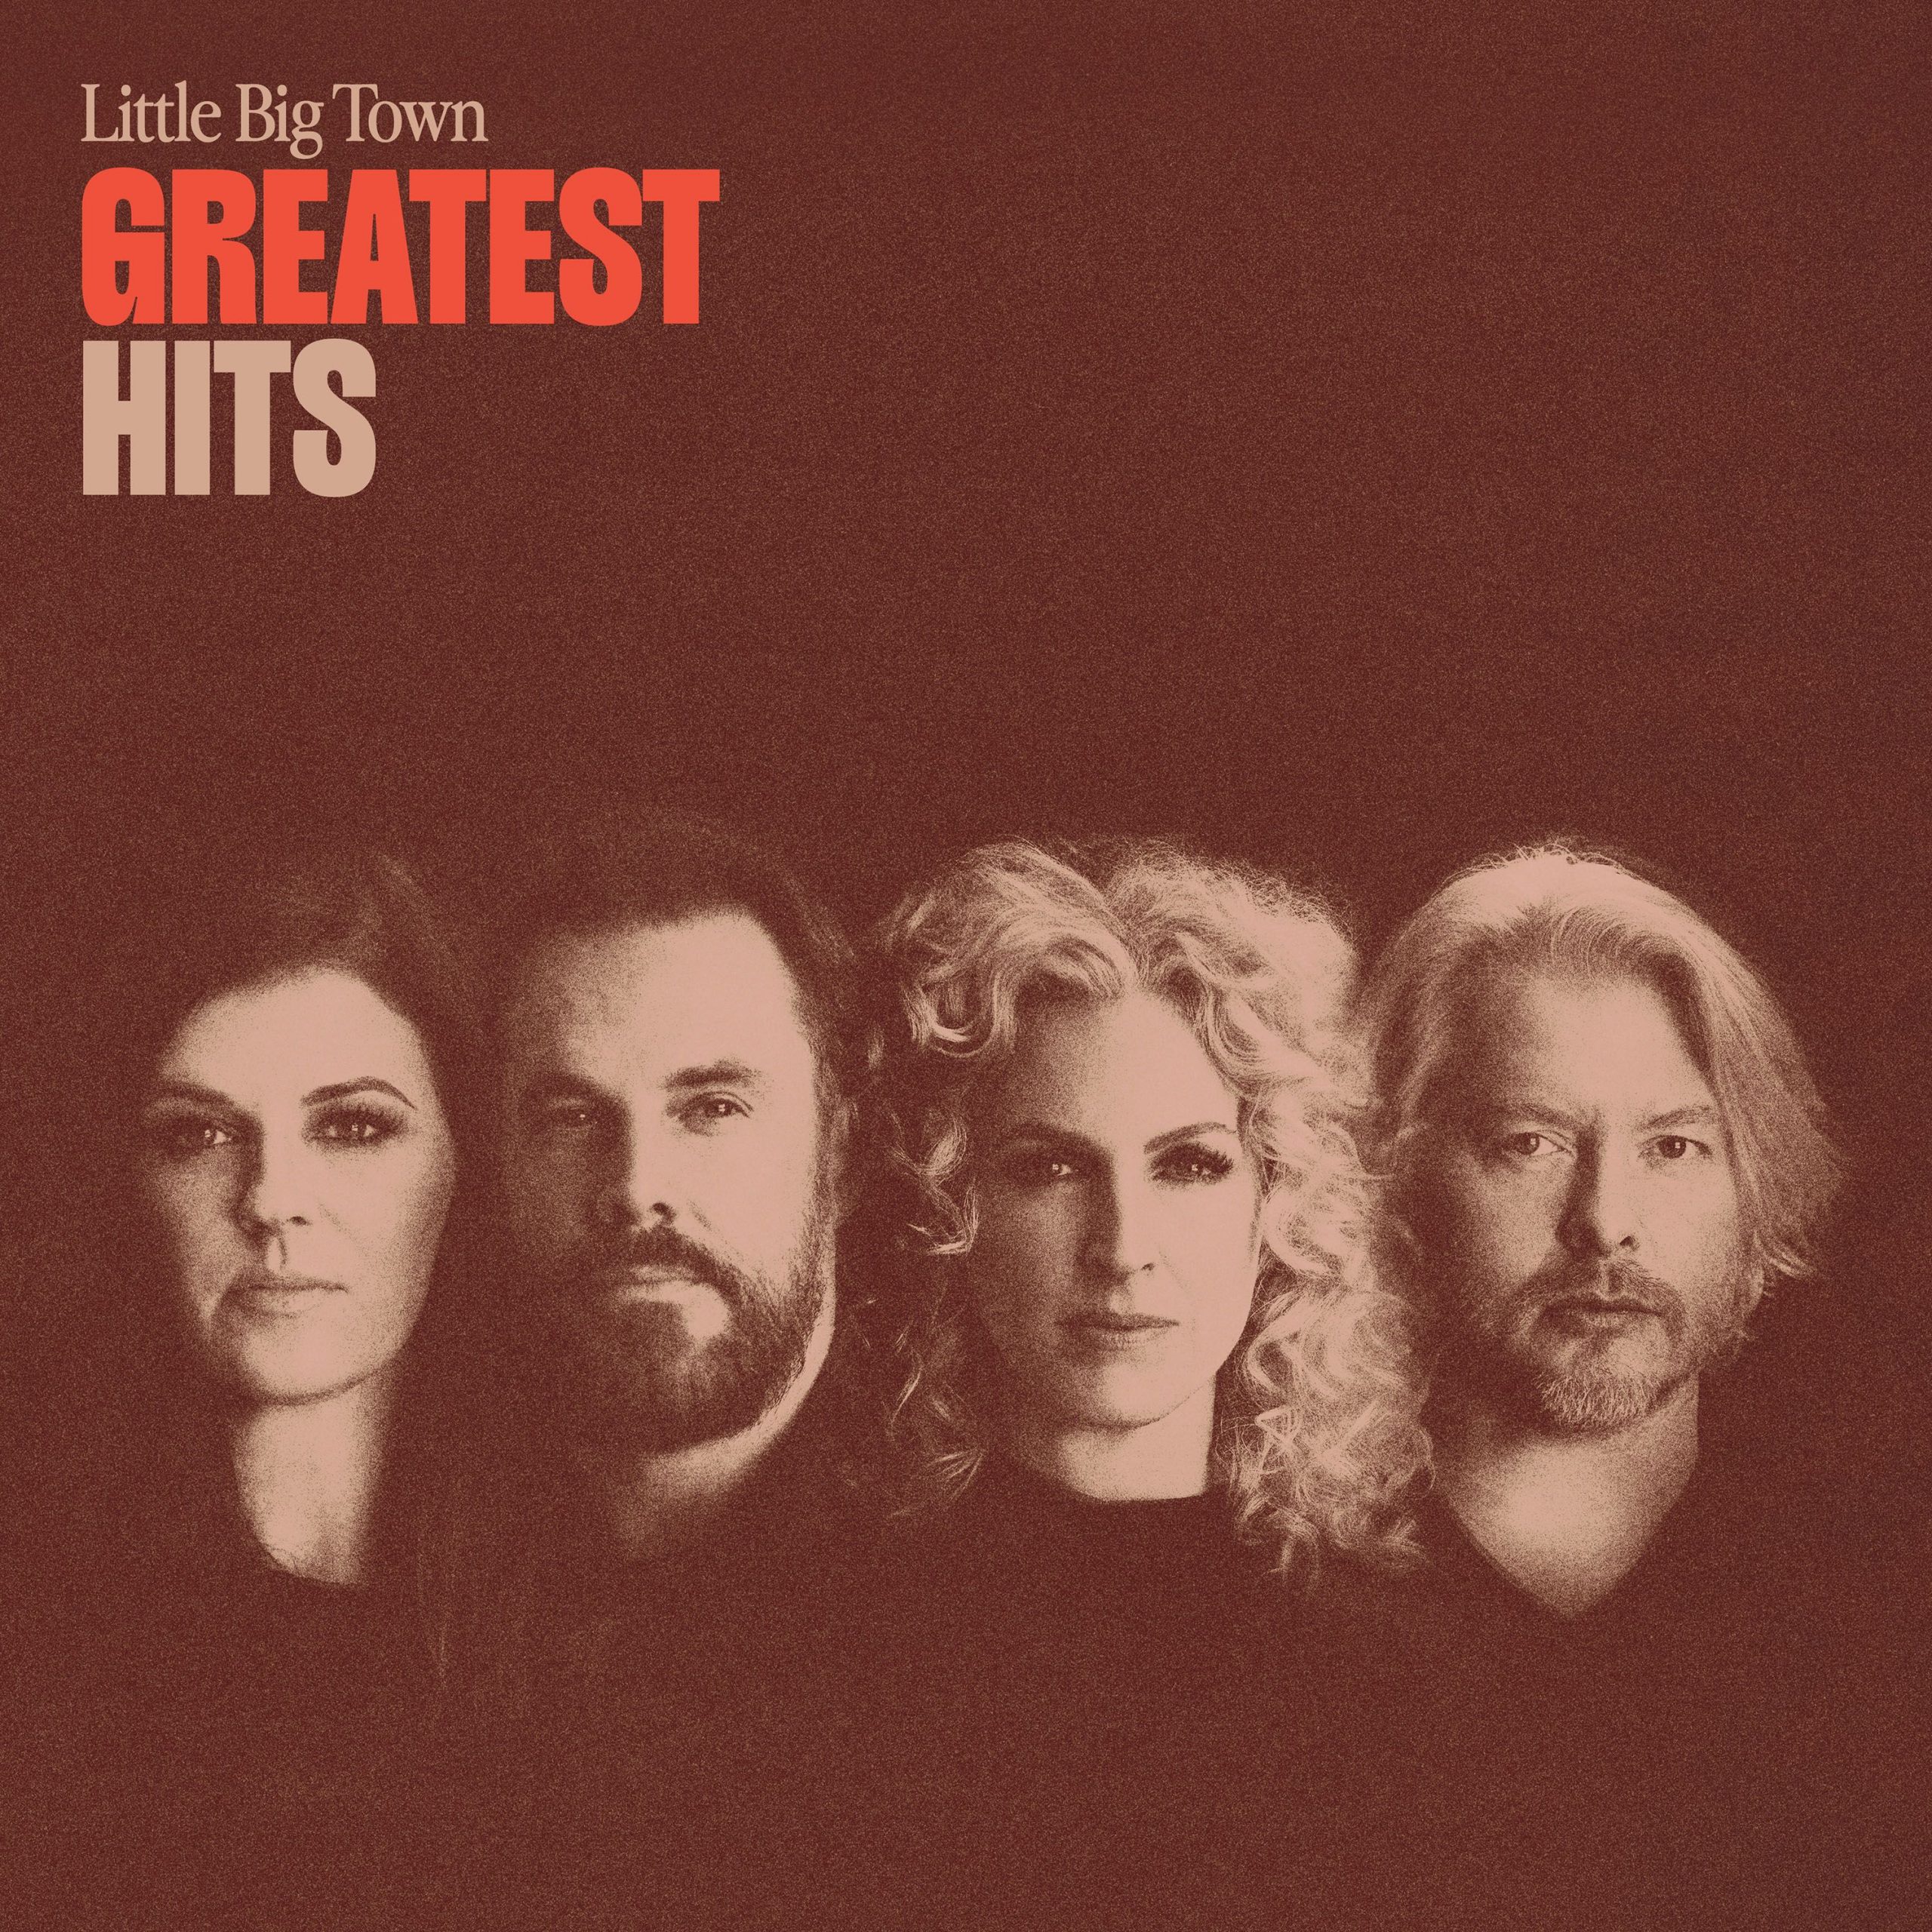 LITTLE BIG TOWN CONTINUE 25TH ANNIVERSARY CELEBRATION WITH THE RELEASE OF CAREER-SPANNING GREATEST HITS ALBUM OUT AUGUST 9, 2024